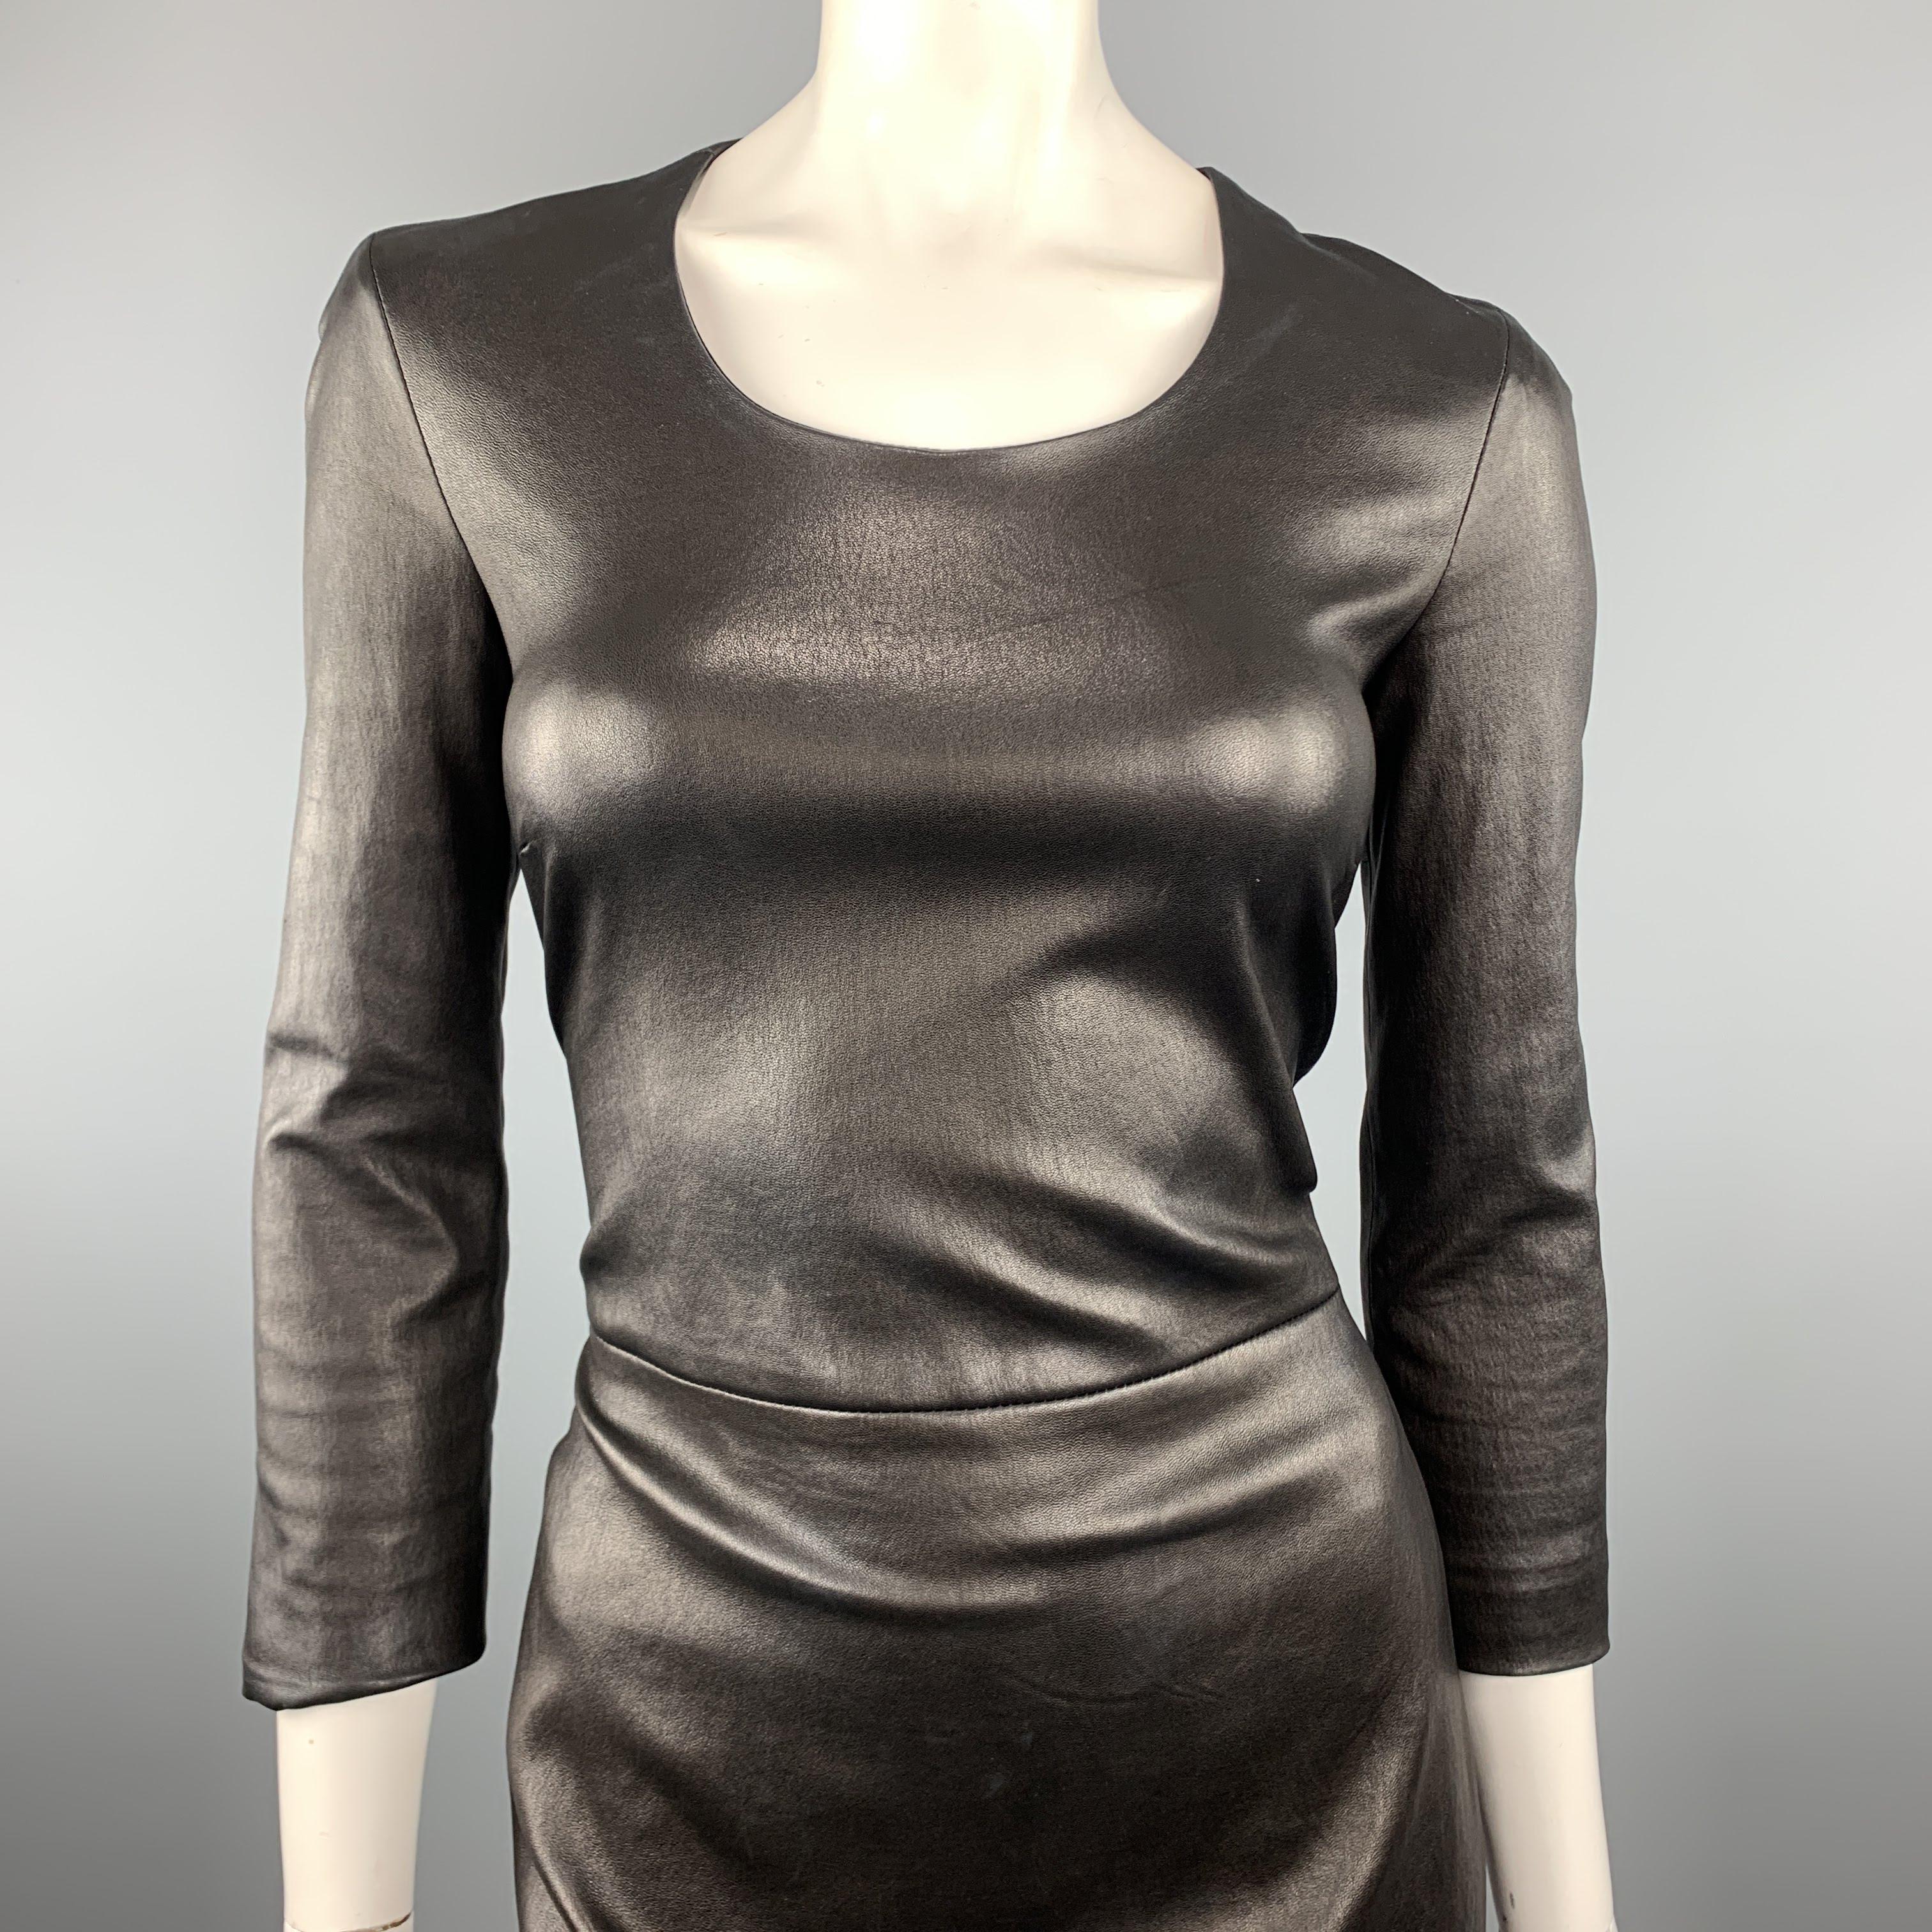 THE ROW sheath dress comes in black stretch leather with a scoop neck, long sleeves, and back zip closure. Made in USA.
 
Excellent Pre-Owned Condition.
Marked: 8
 
Measurements:
 
Shoulder: 15 in.
Bust: 34 in.
Waist: 28 in.
Hip: 34 in. in.
Sleeve: